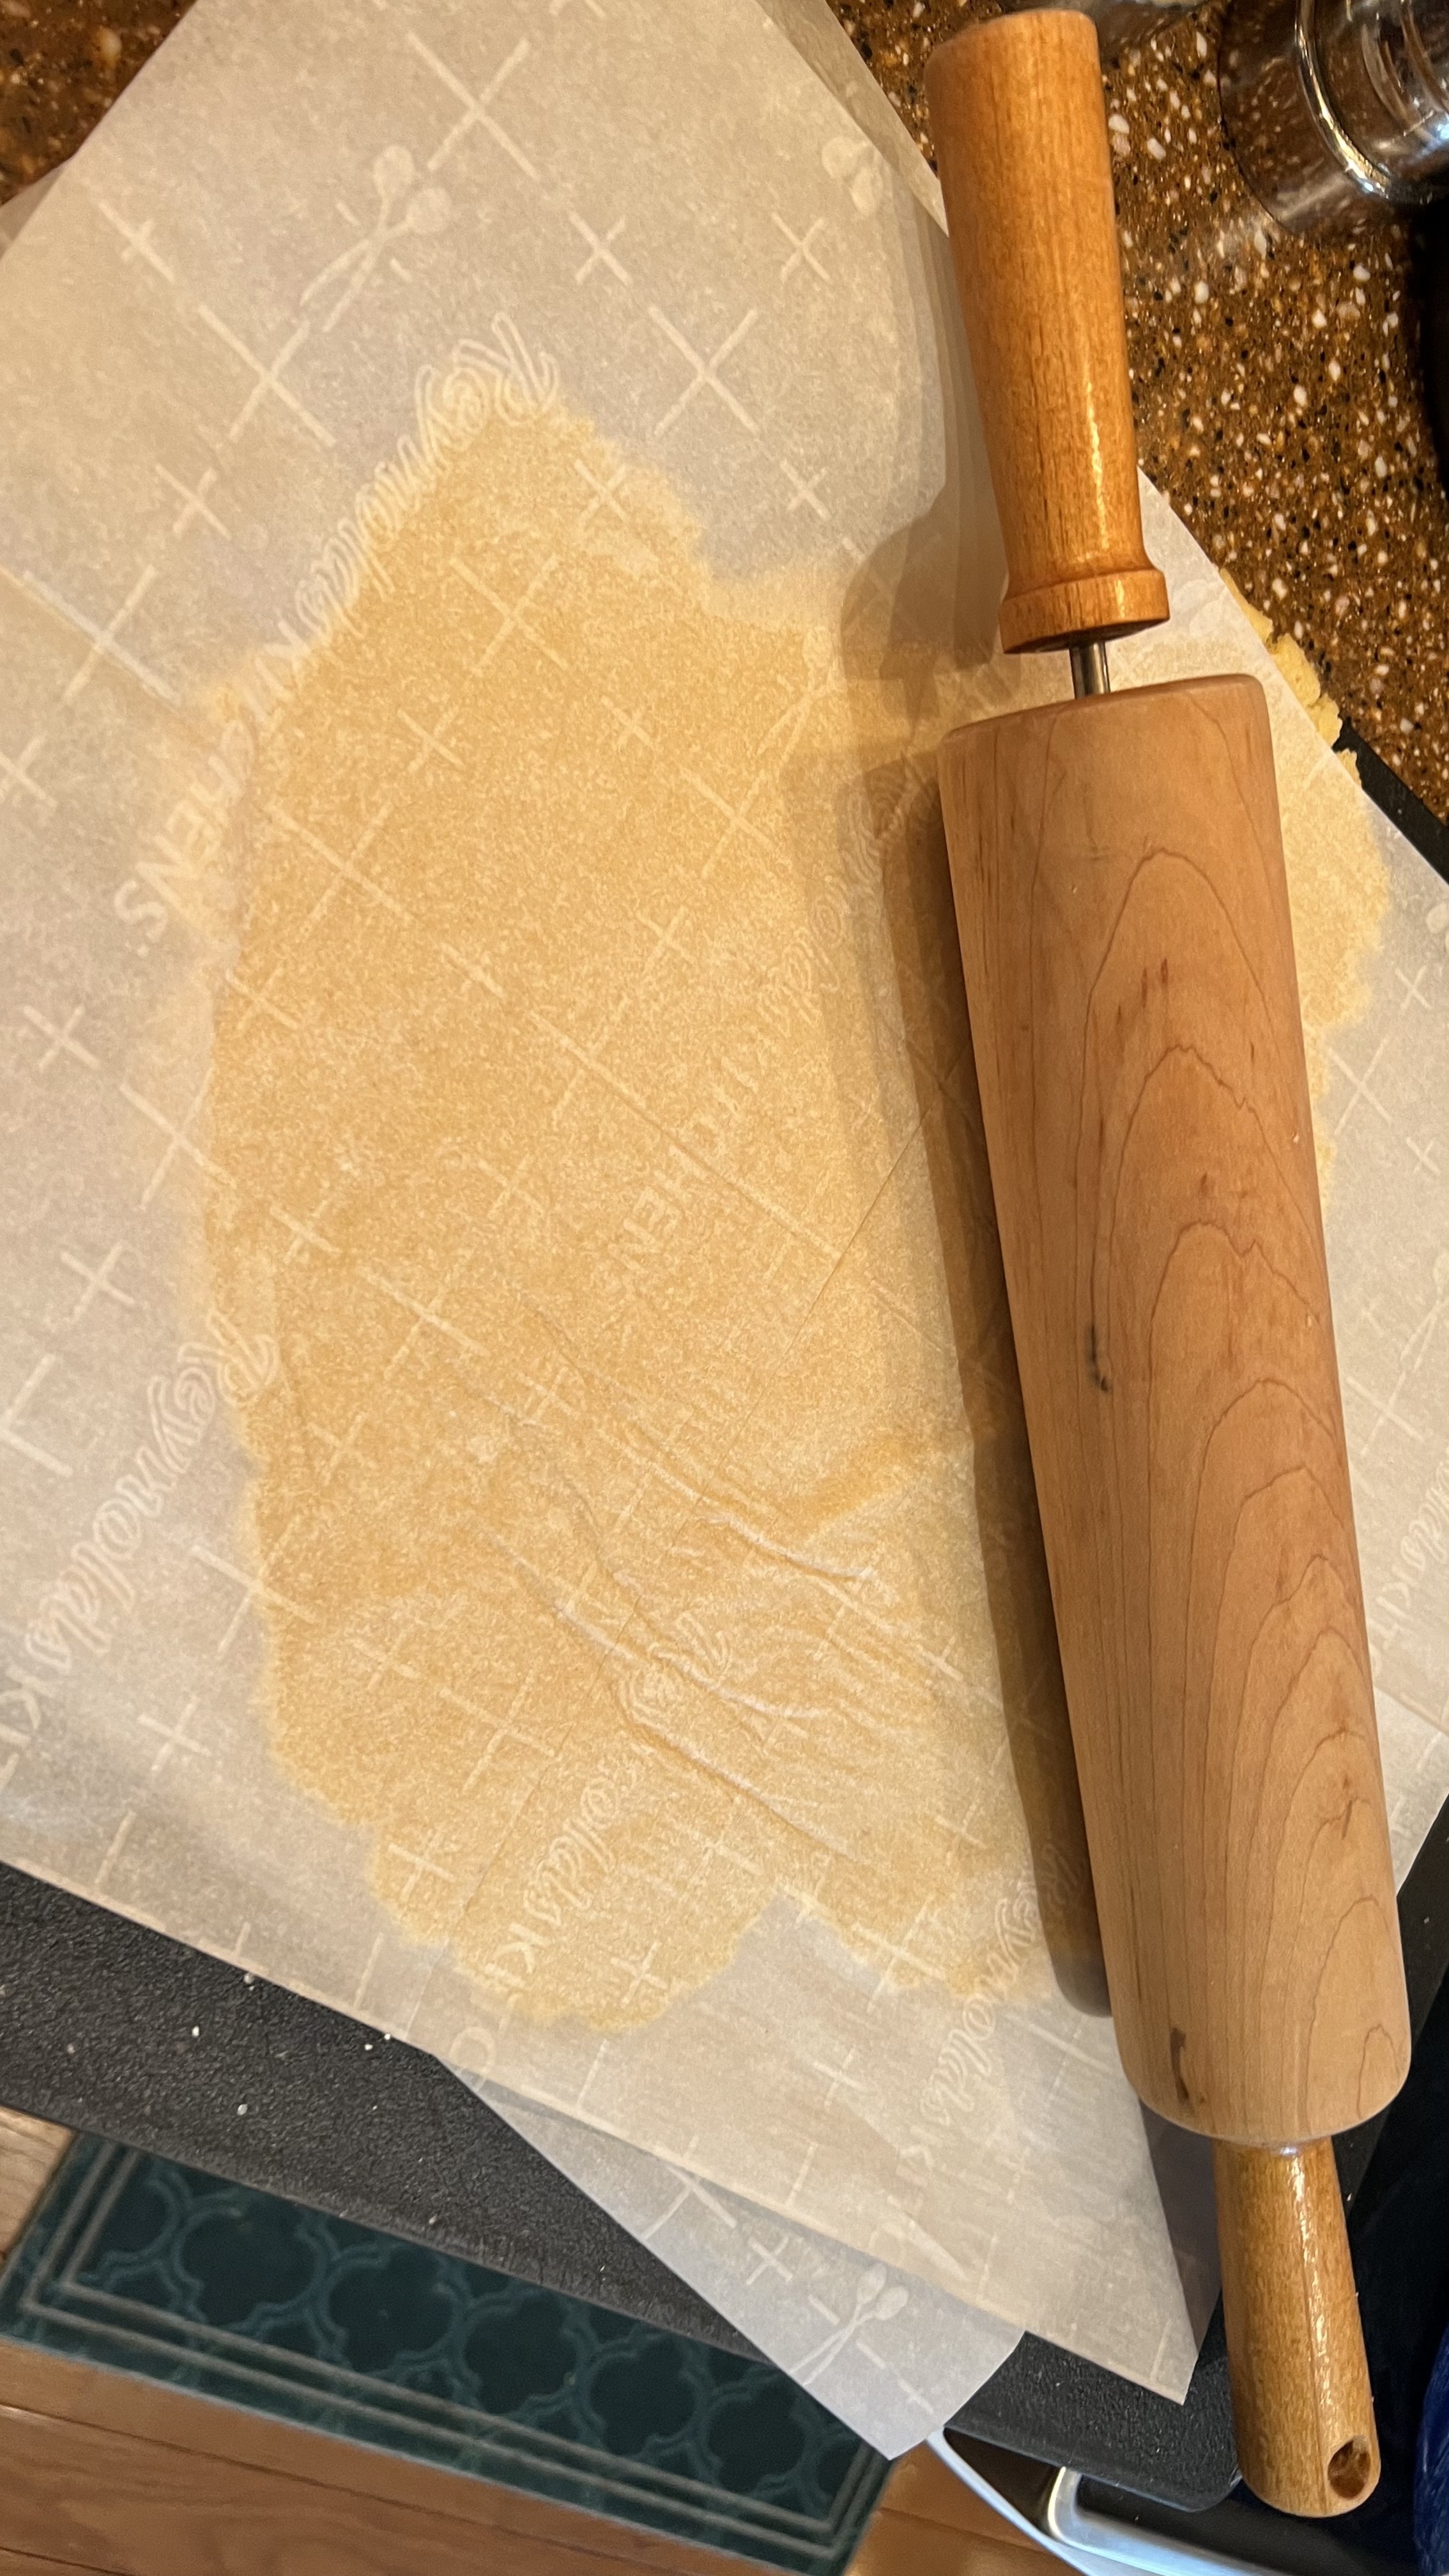 parchment paper used to roll pizza dough